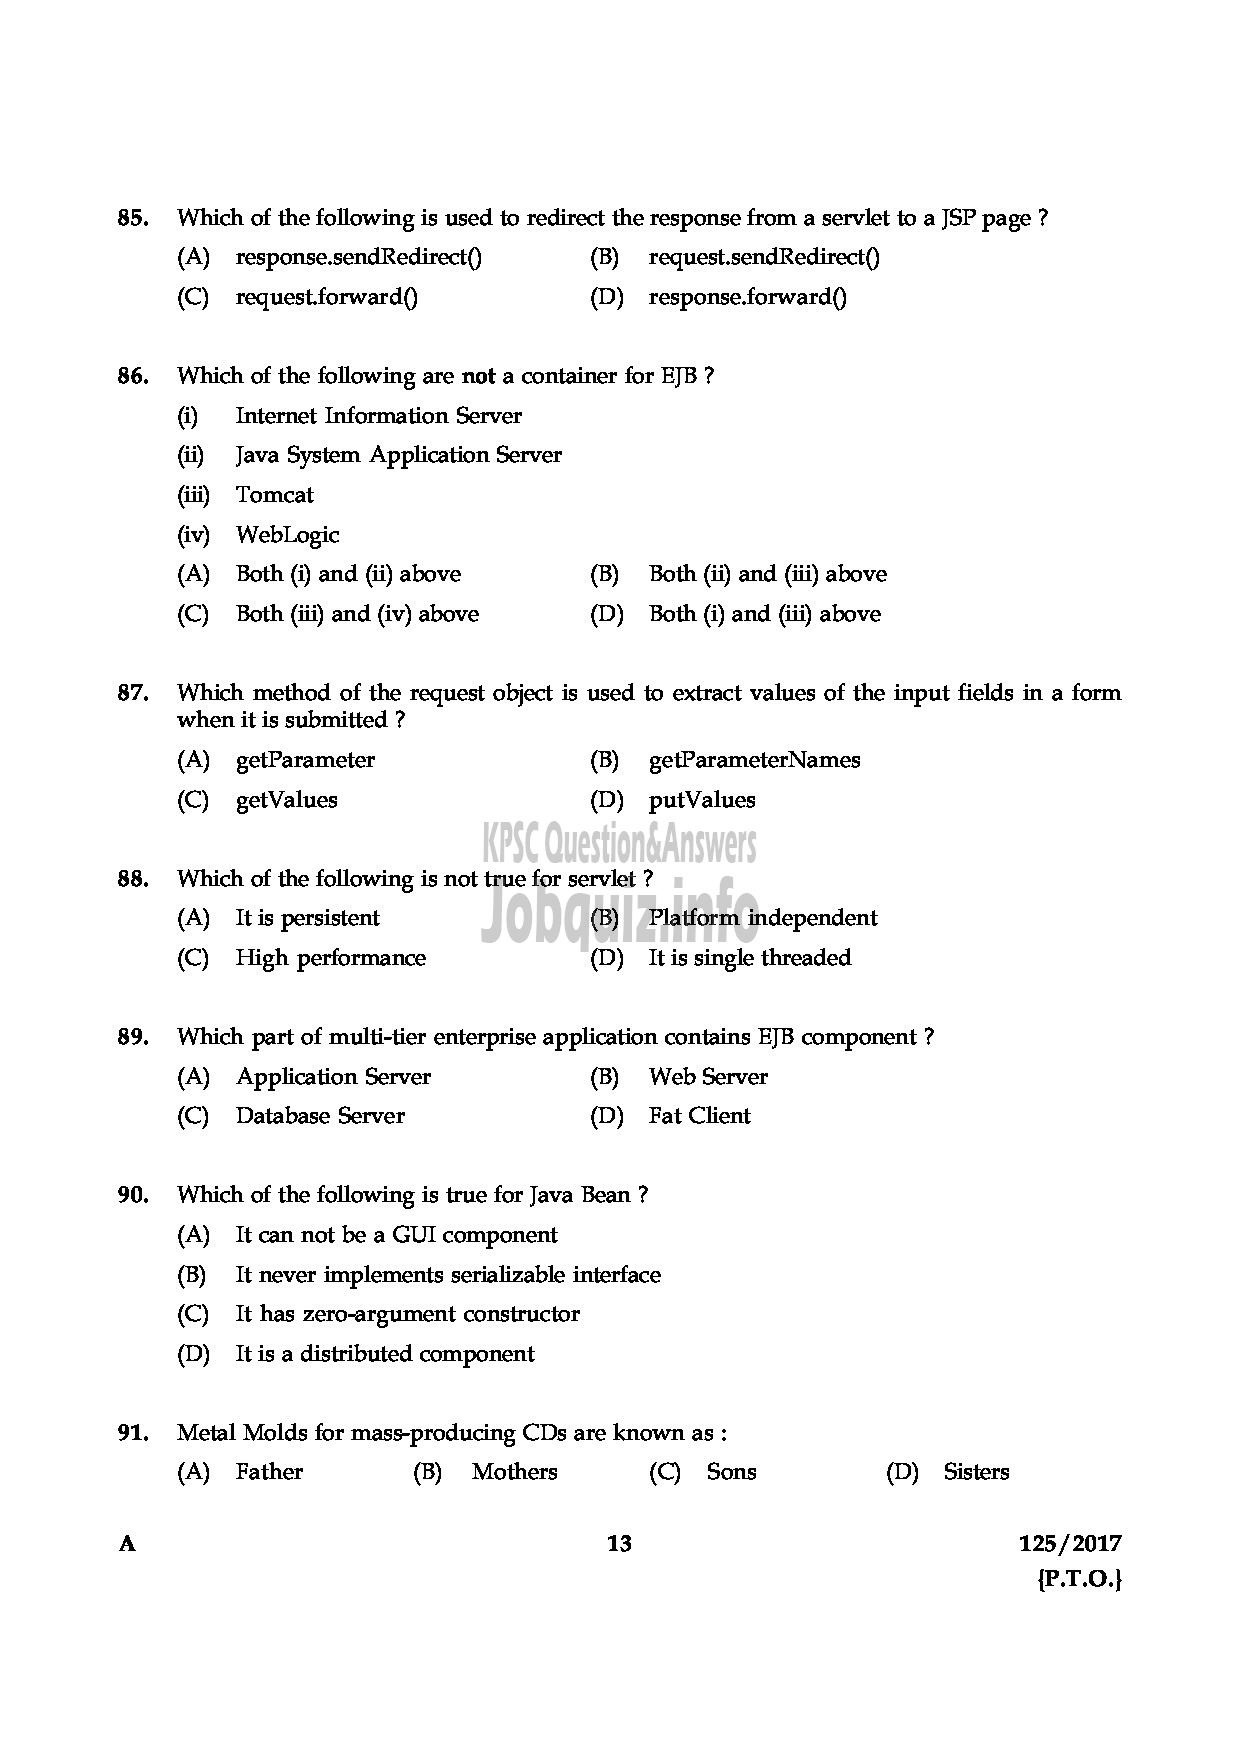 Kerala PSC Question Paper - LECTURER IN COMPUTER APPLICATION COLLEGIATE EDUCATION-13